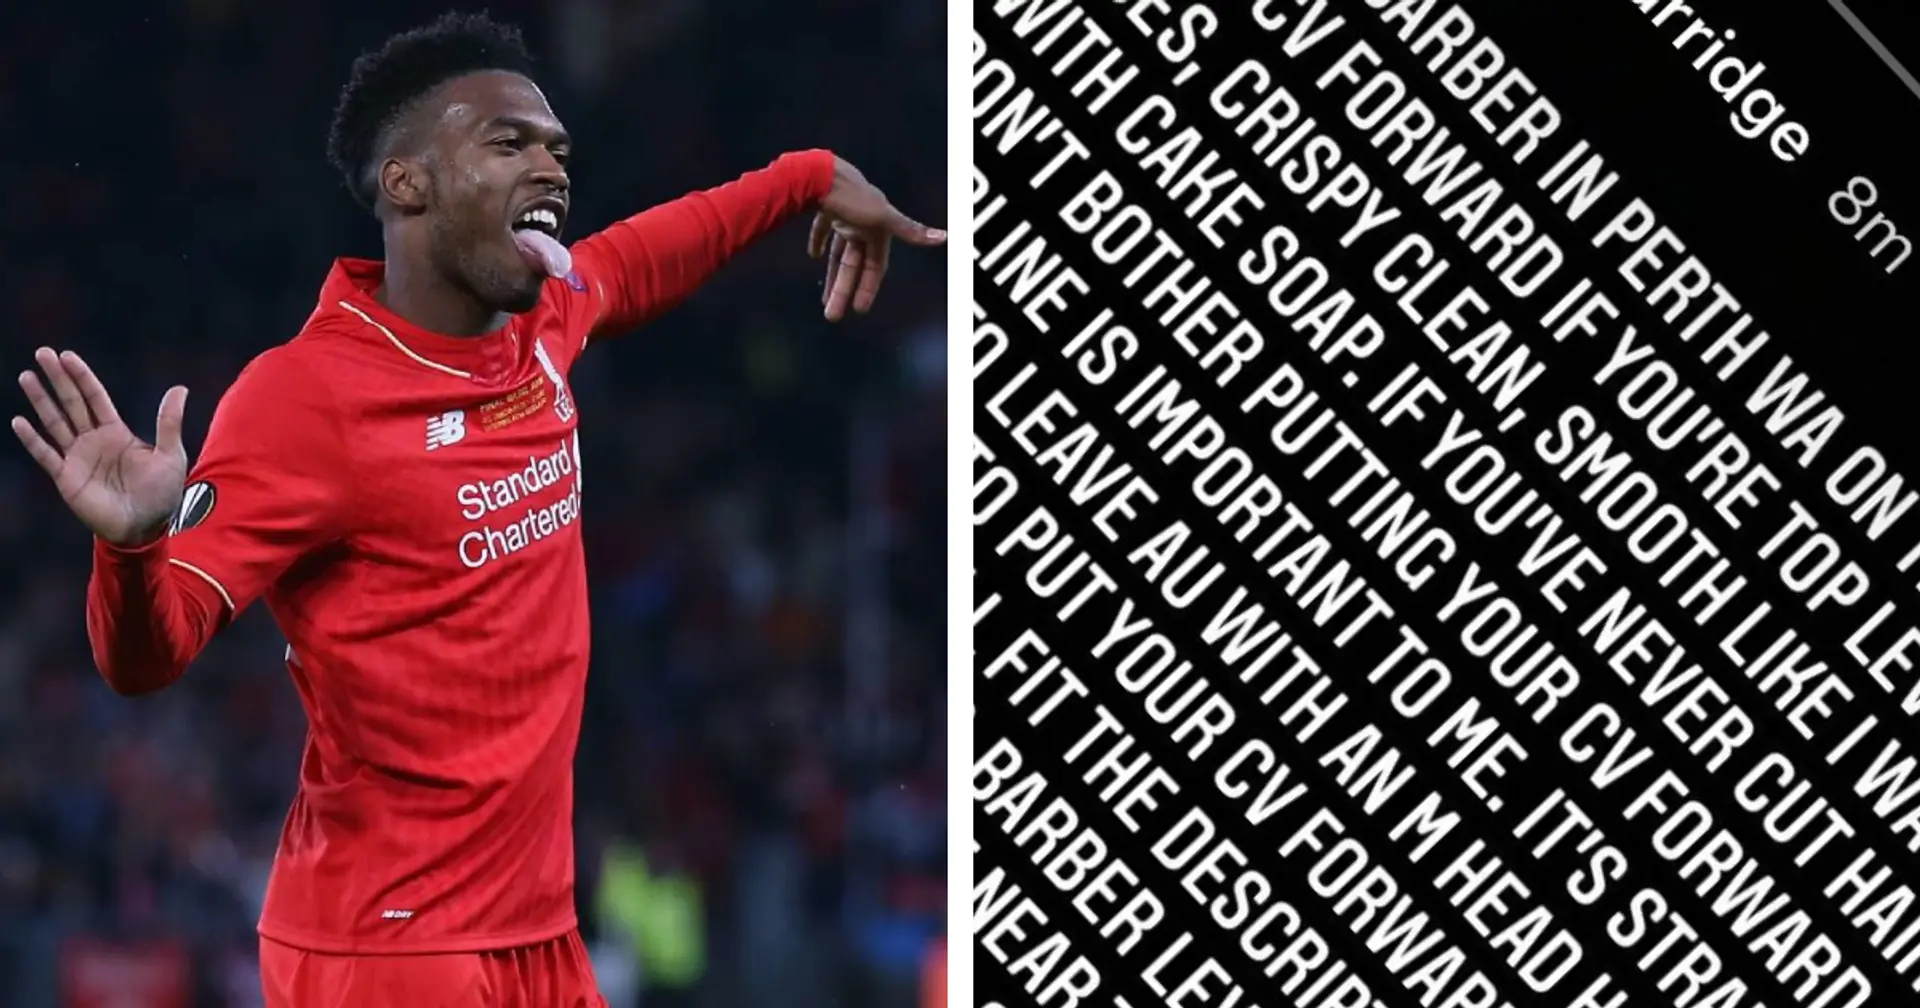 Daniel Sturridge goes viral with hilarious list of demands for barber while quarantining in Australia